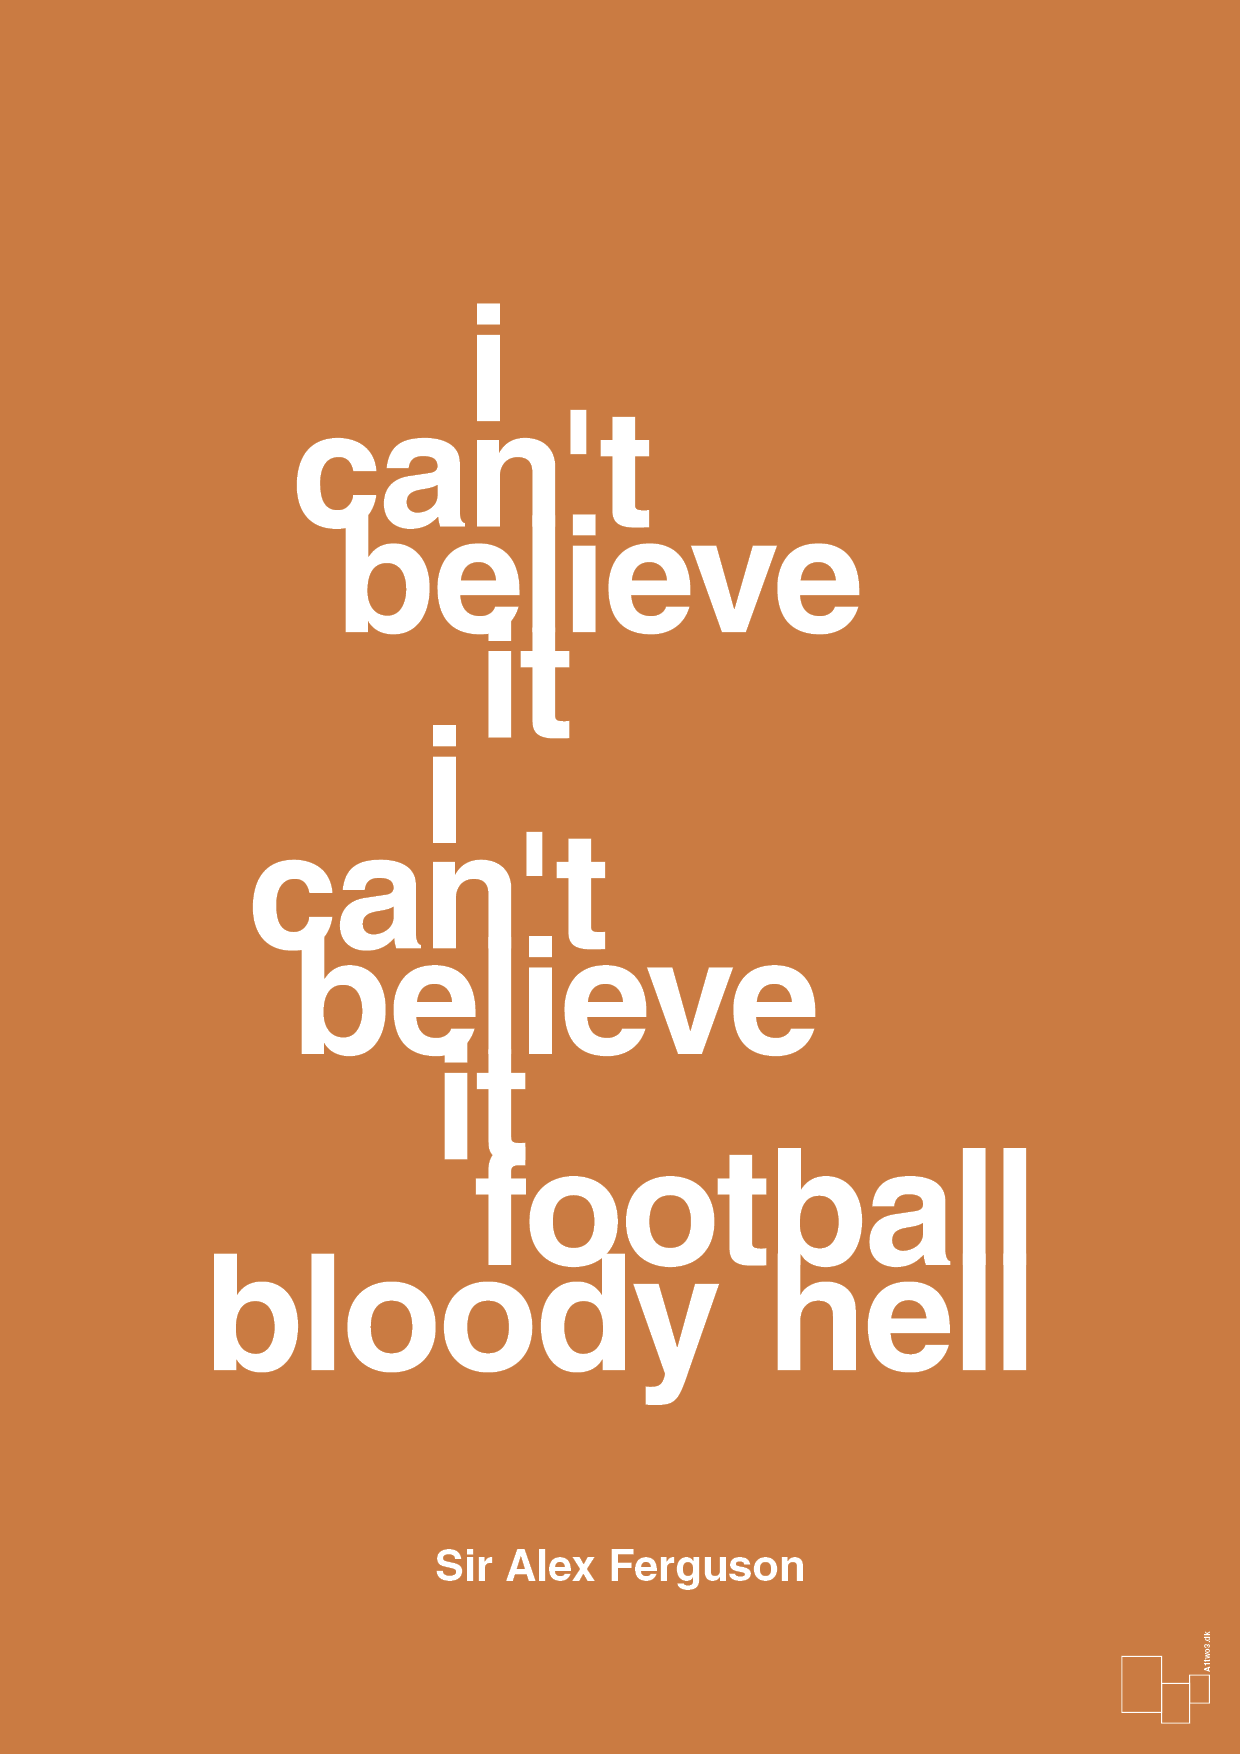 i can't believe it i can't believe it football bloody hell - Plakat med Citater i Rumba Orange